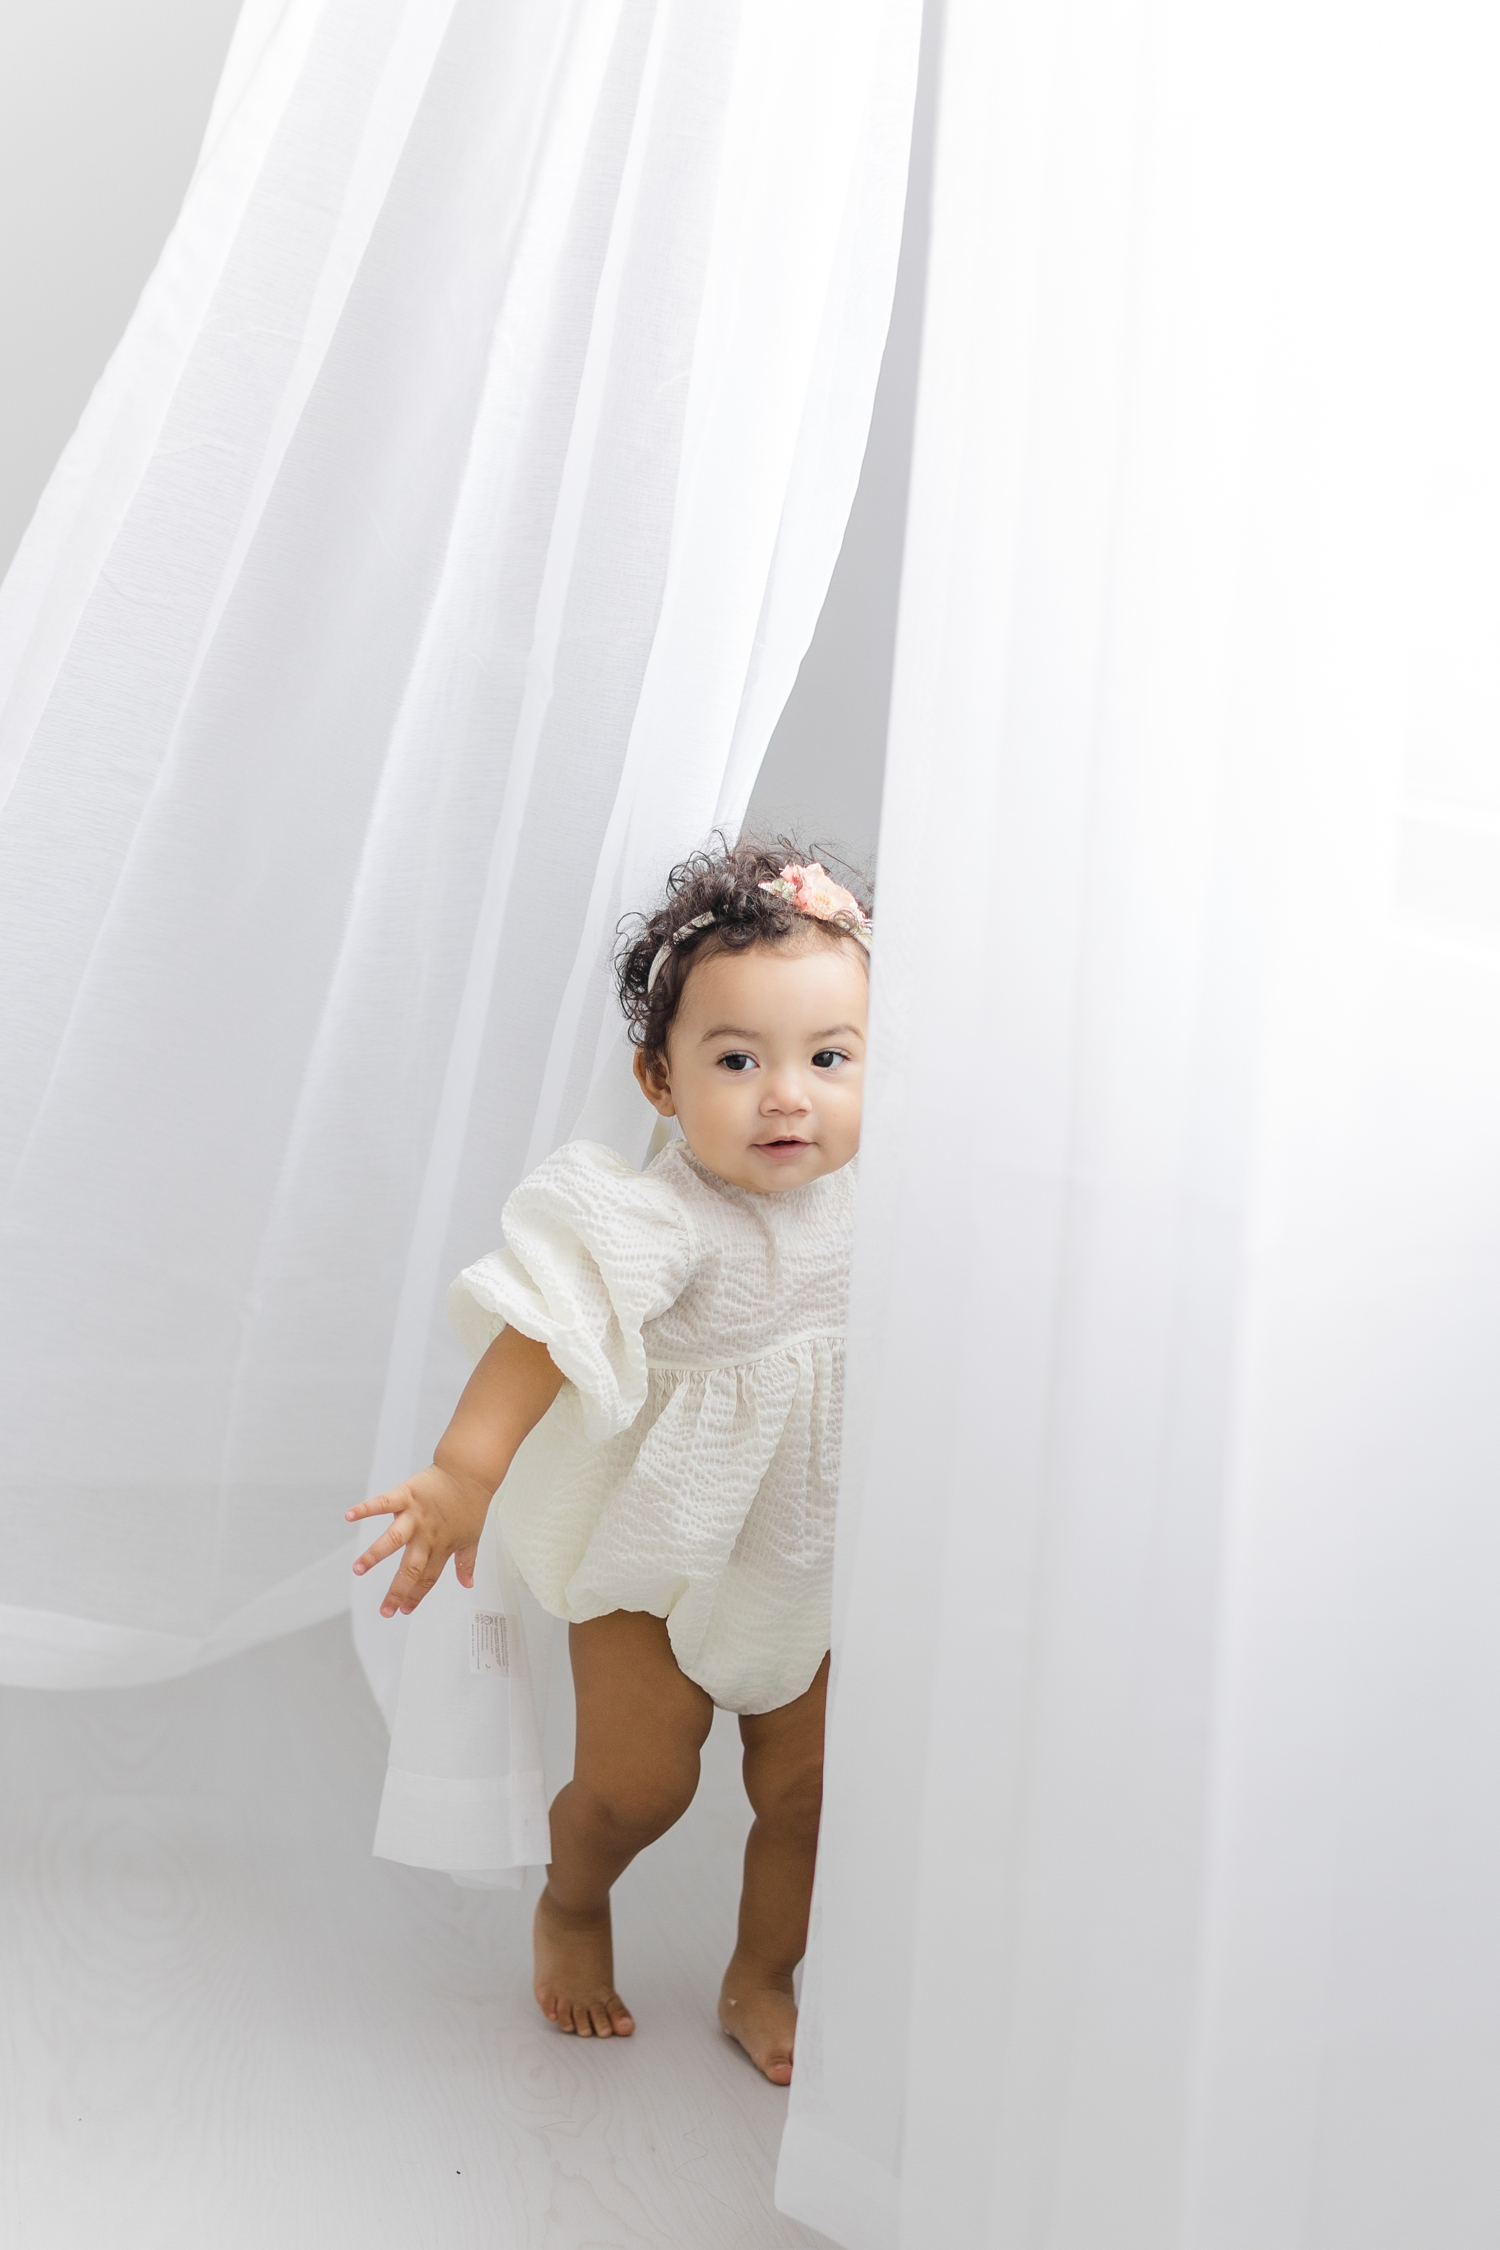 Baby Zoey dressed in a white bubble romper playing joyfully in white flowy curtains | CB Studio